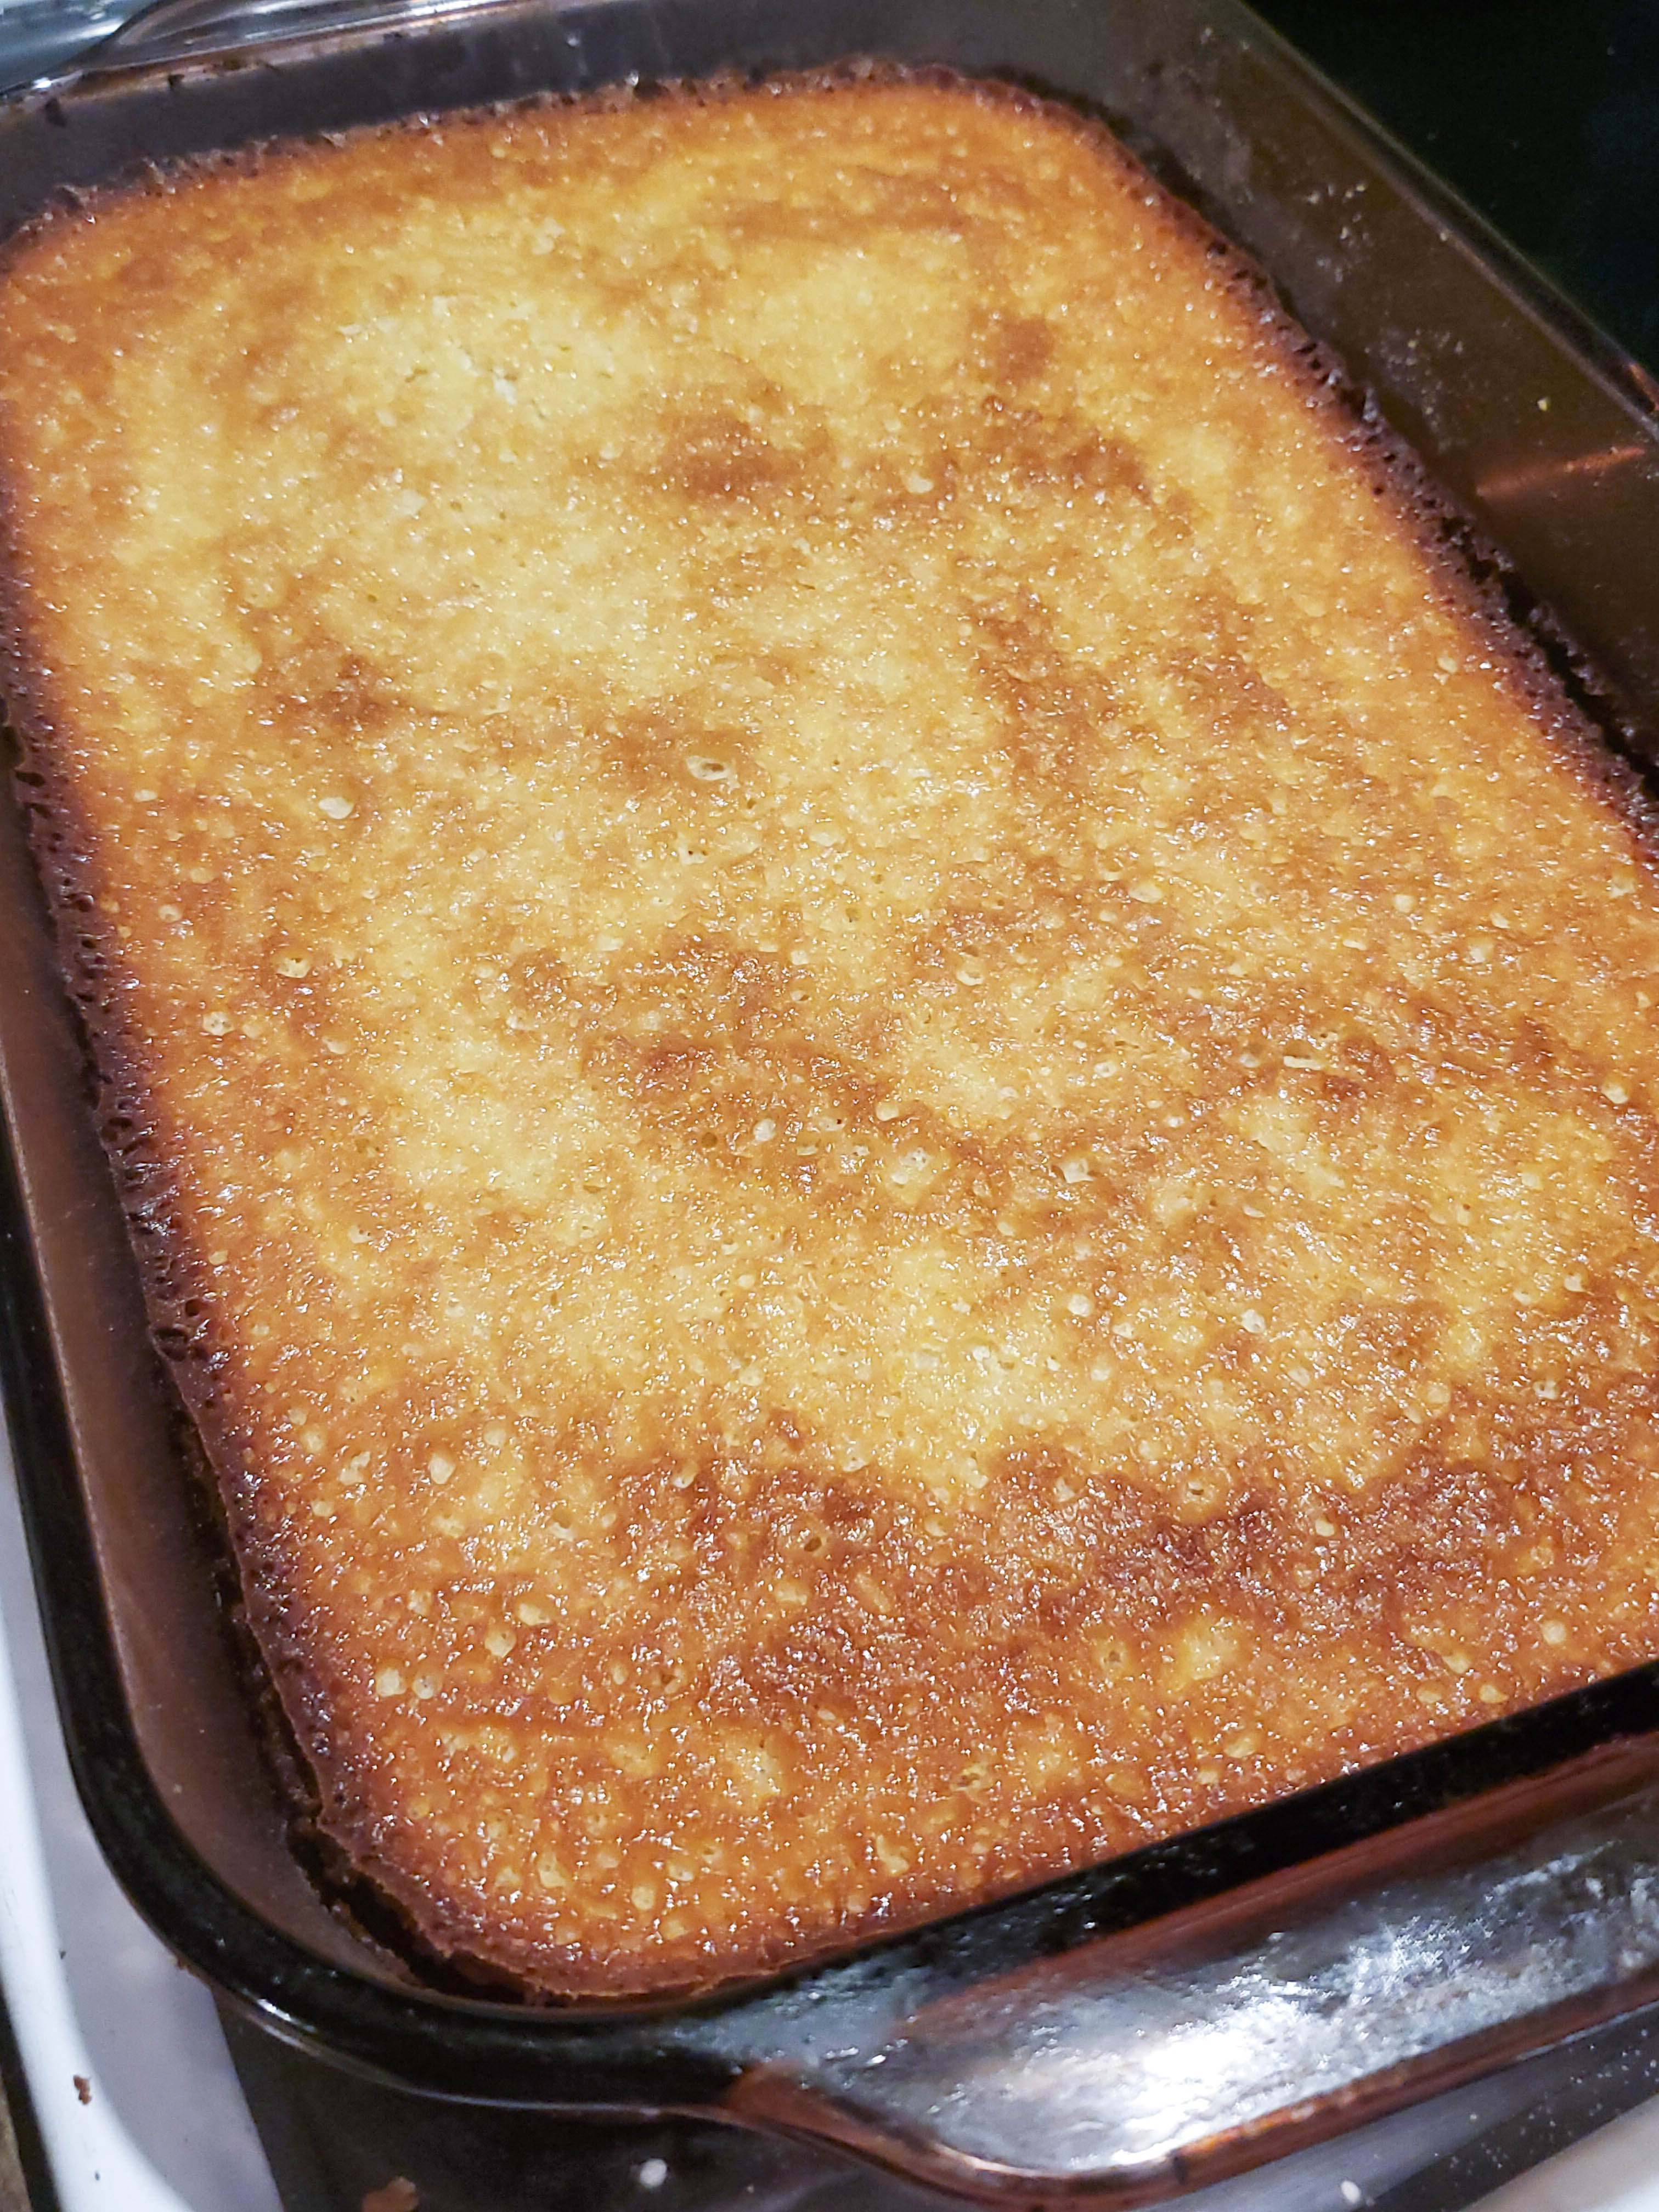 lemon surprise cake from the oven